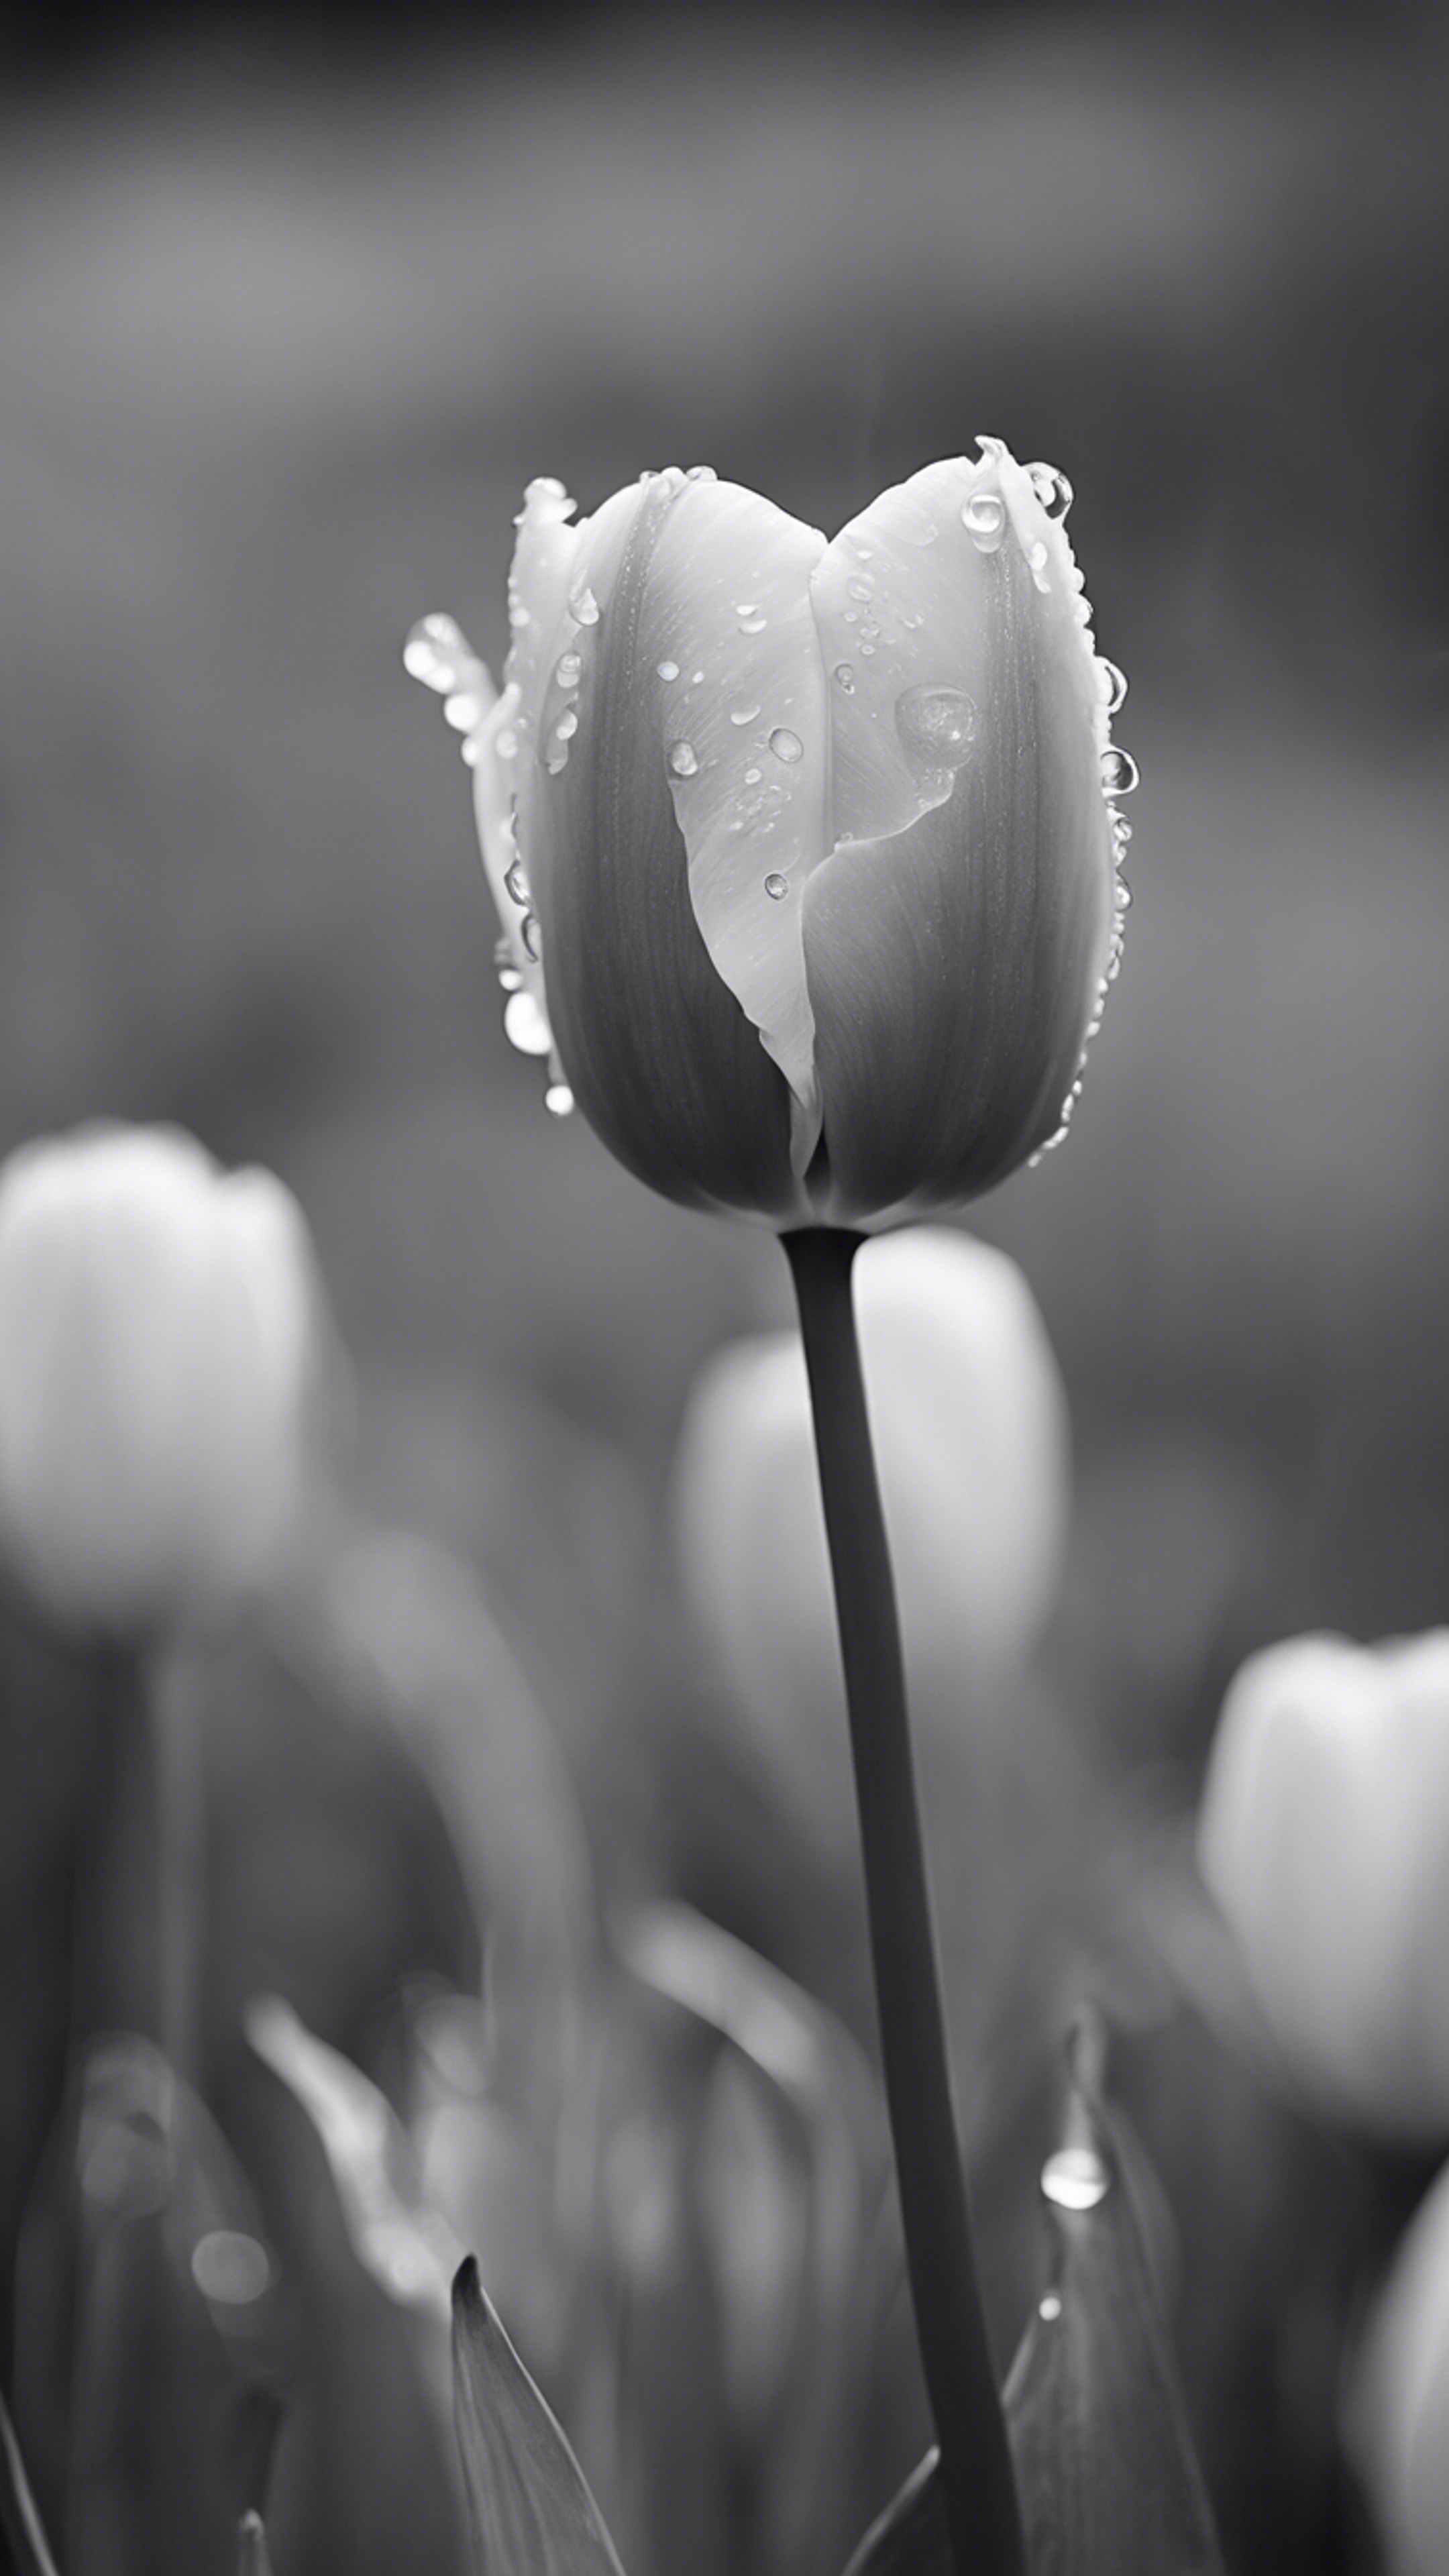 A black-and-white photograph of a tulip in full bloom in the rain. Behang[646ce87a121a4320b6e6]